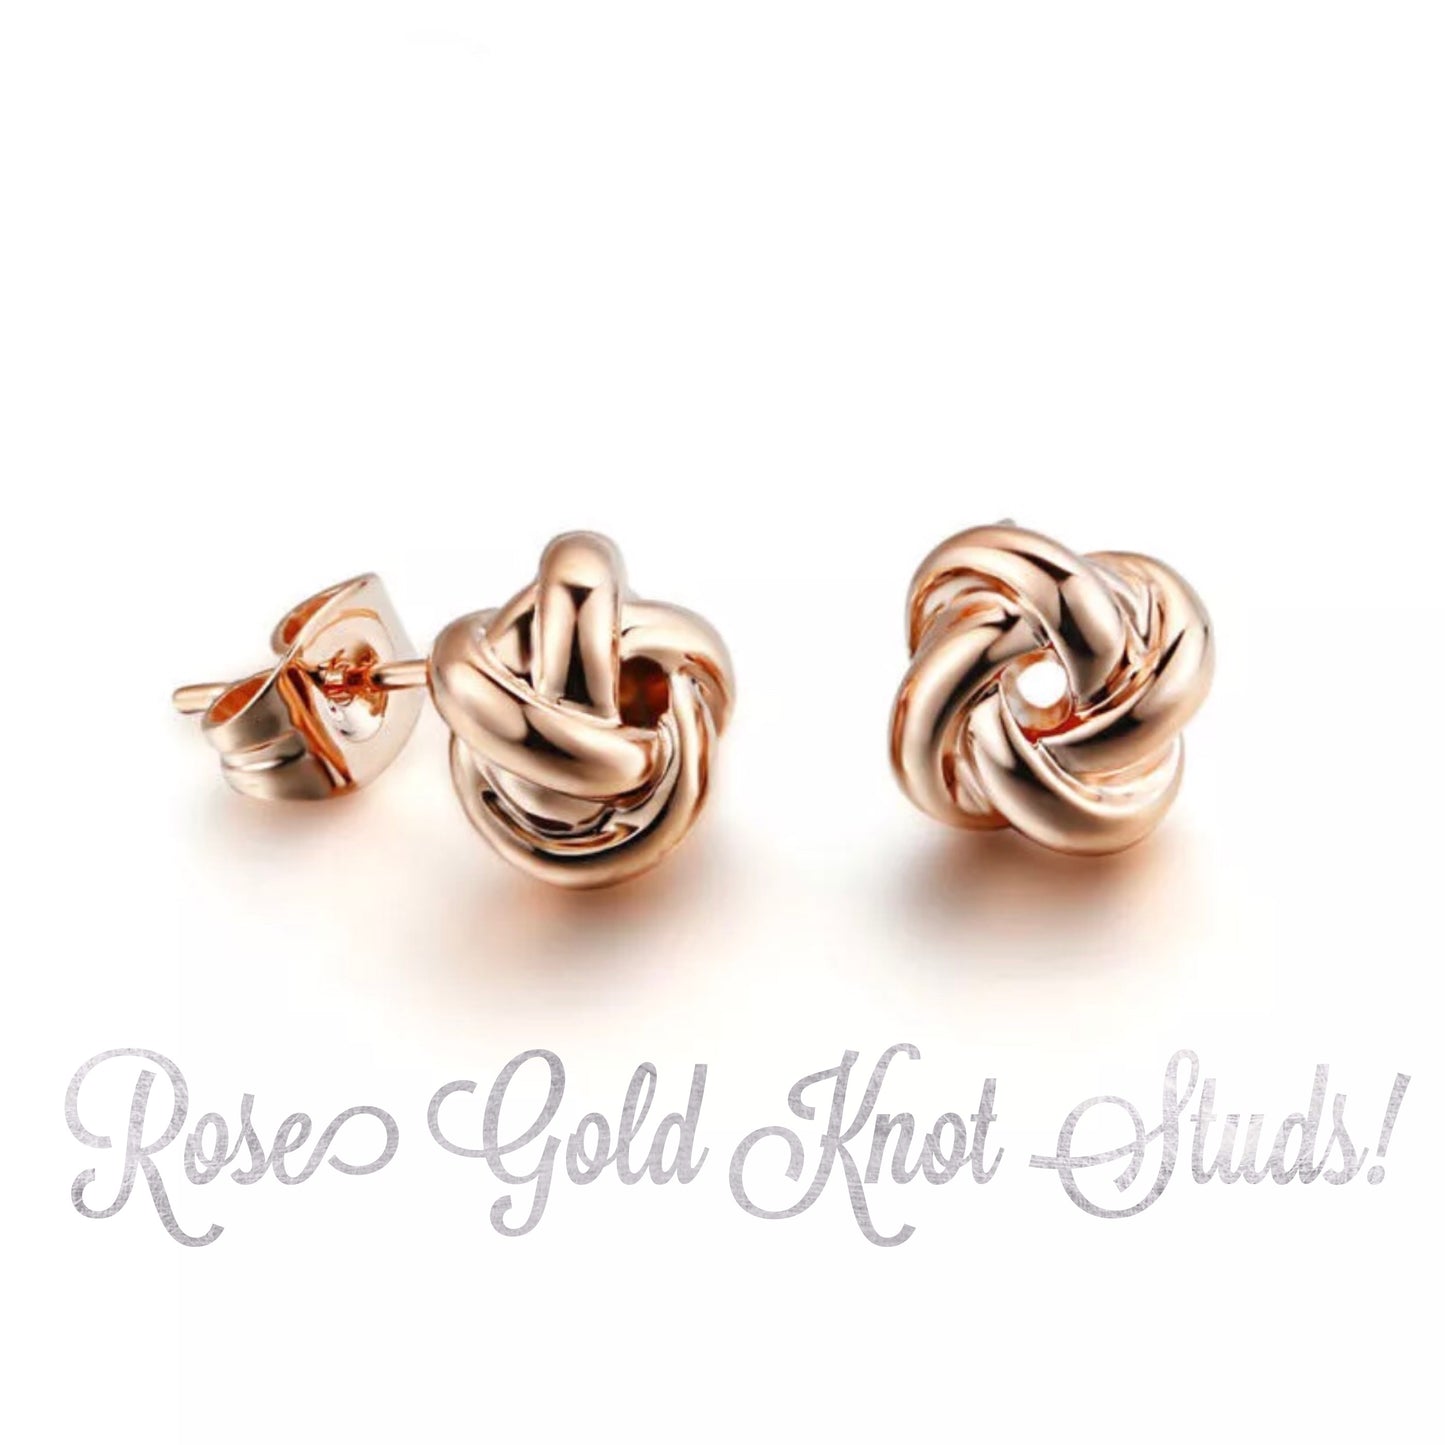 Soon You'll Be My Sister! Knot Earrings